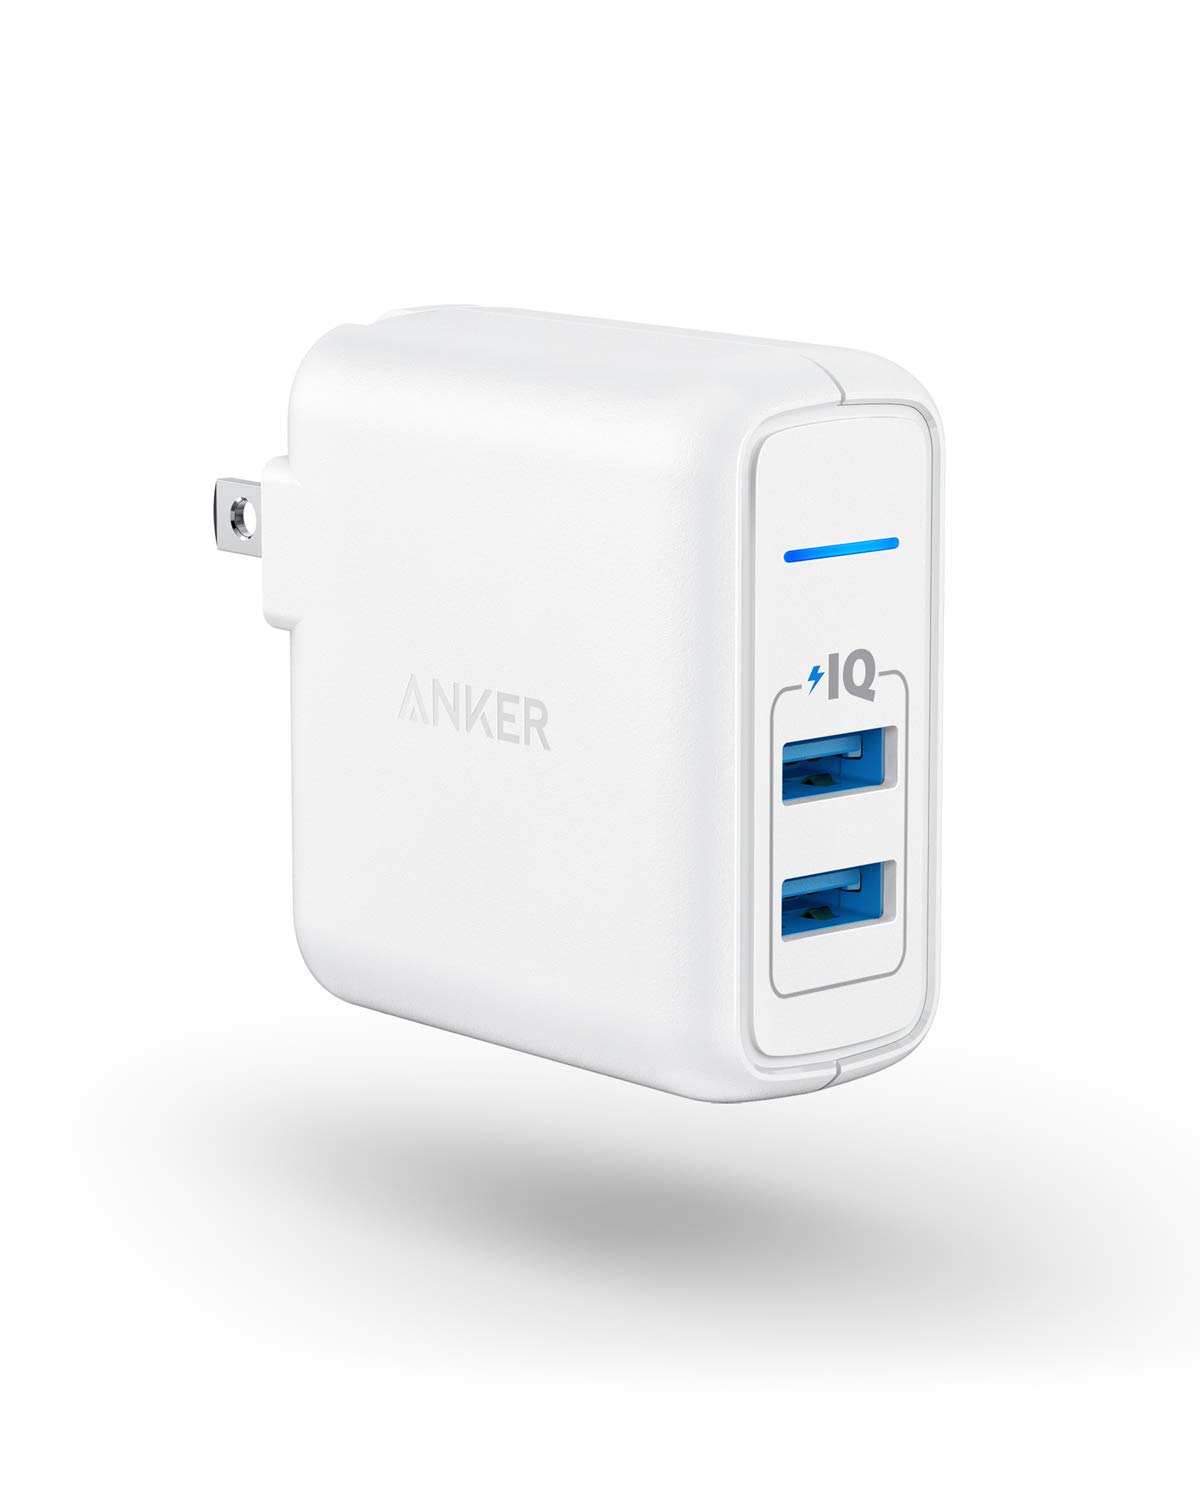 USB Charger, Anker Elite Dual Port 24W Wall Charger, PowerPort 2 with PowerIQ and Foldable Plug, for iPhone For Sale in Trinidad